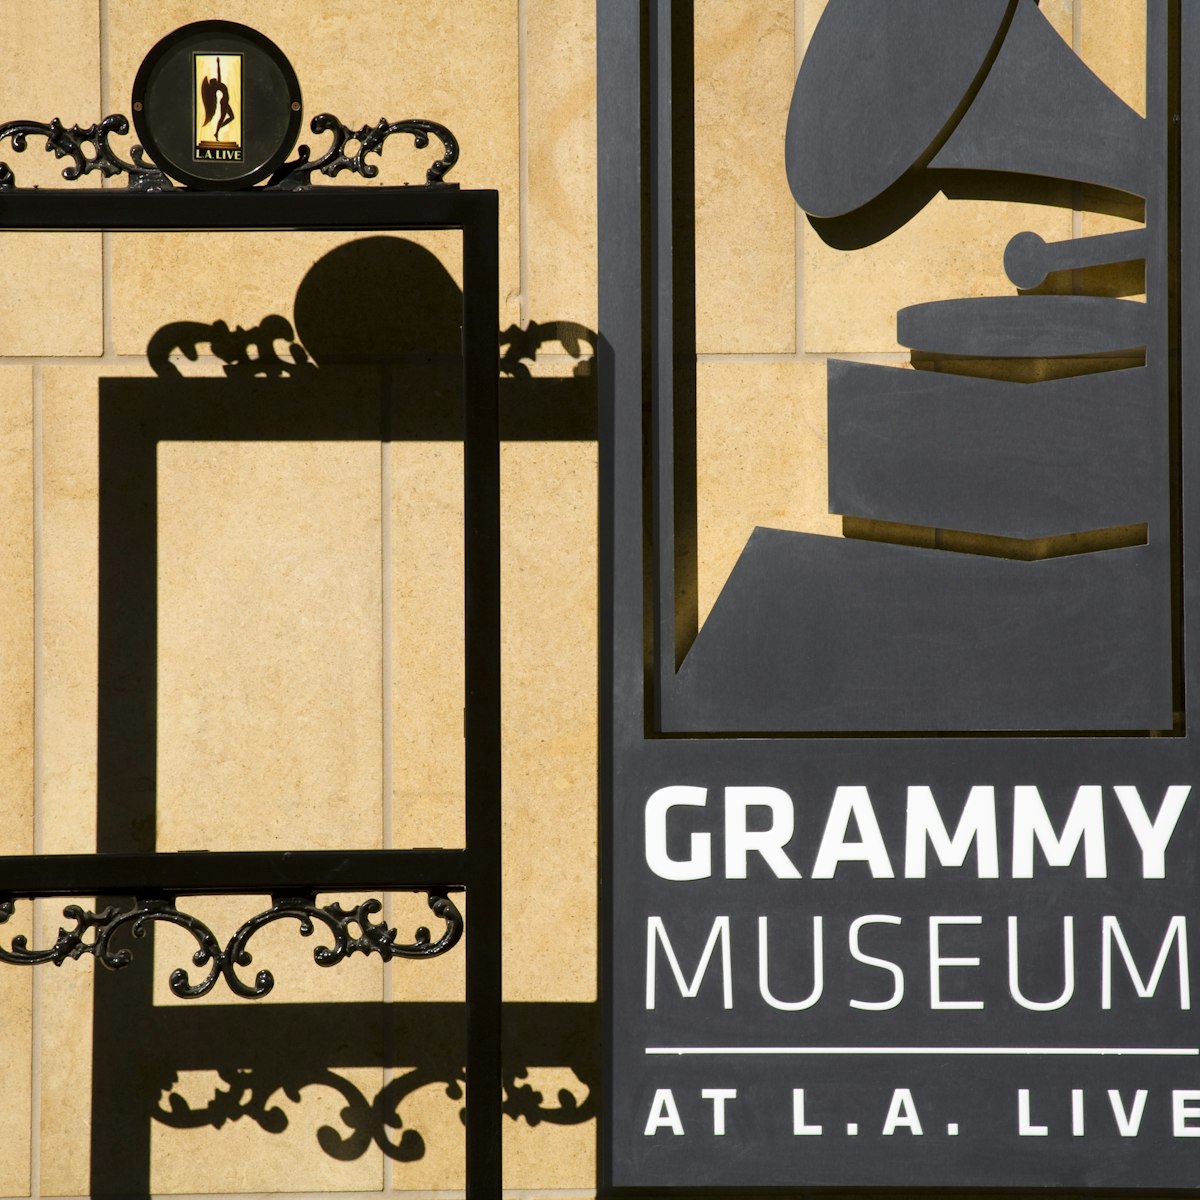 Grammy Museum at L.A. Live.